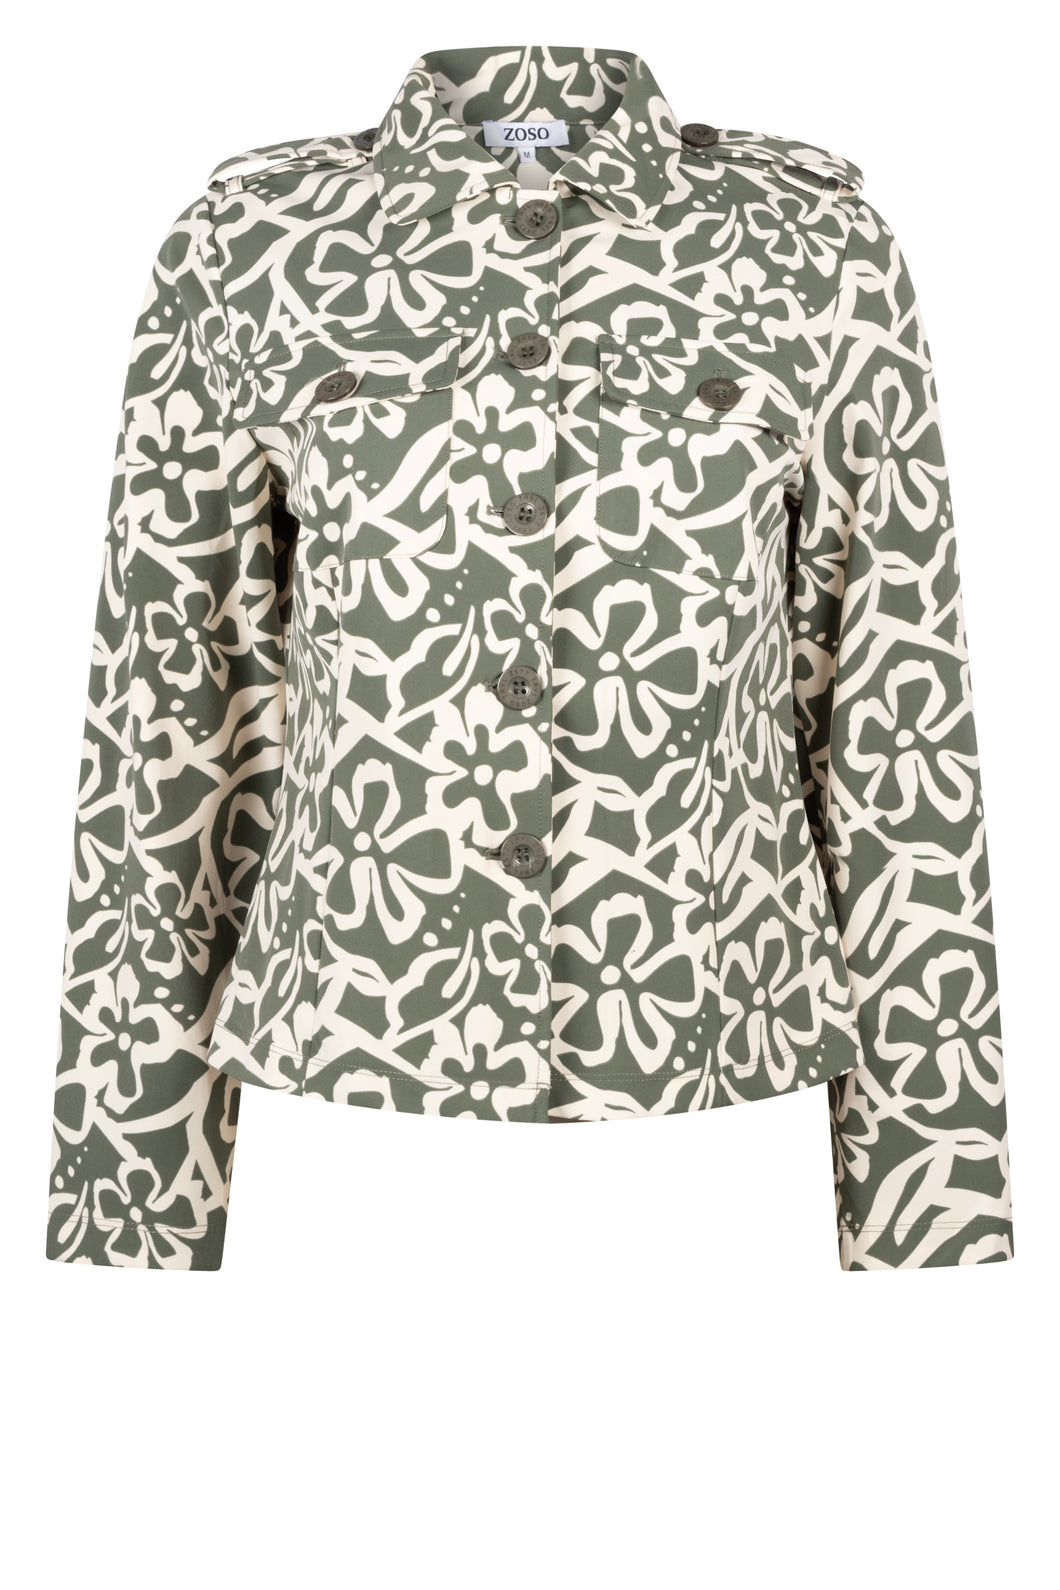 ZOSO MAGGY PRINTED TRAVEL JACKET green/ivory